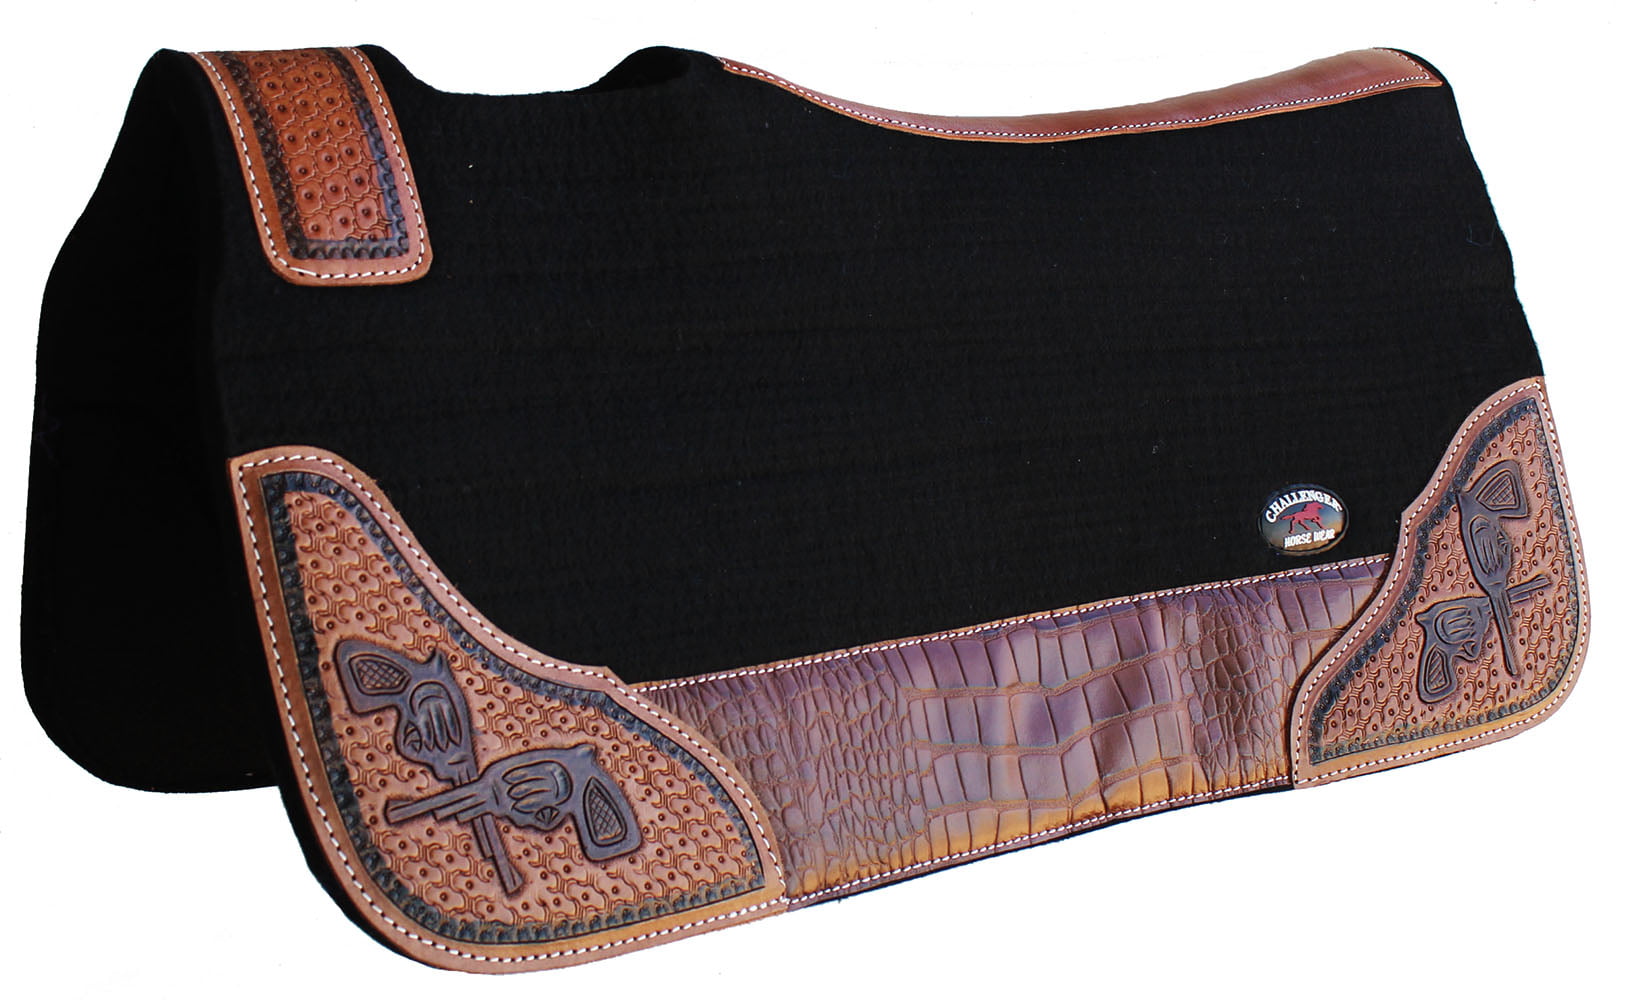 NEW WESTERN SADDLE PAD NUMNAH 32*32 GREY BROWN RED BLUE COLORS 